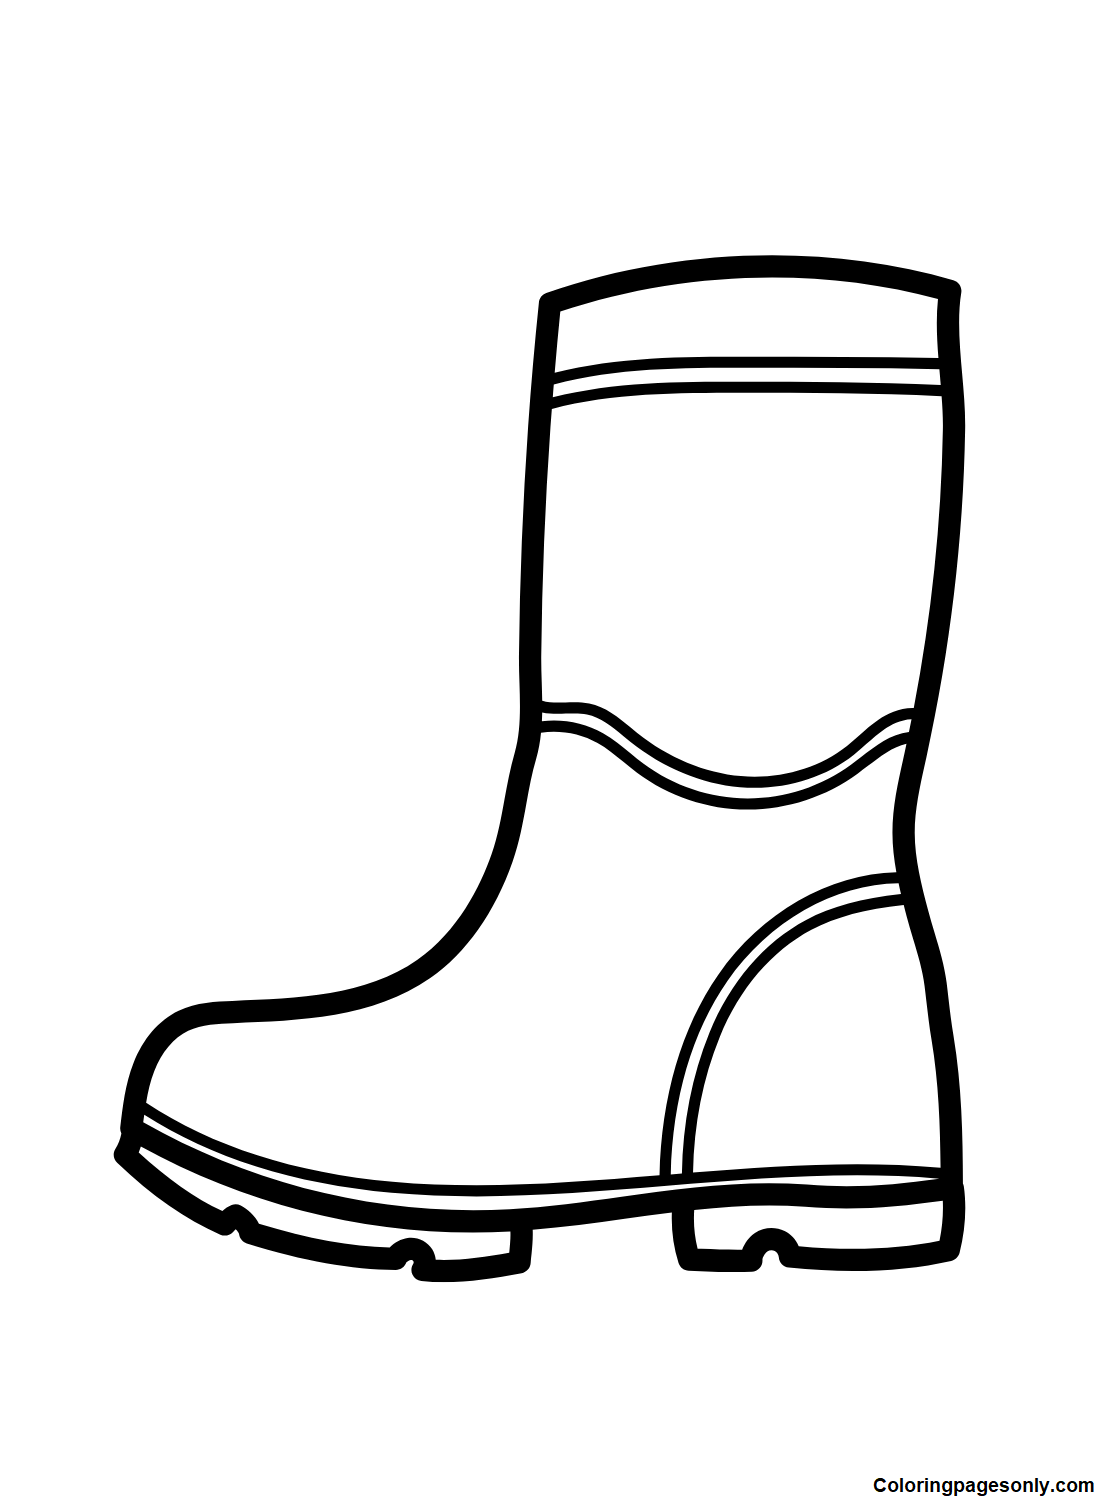 Boots coloring pages printable for free download